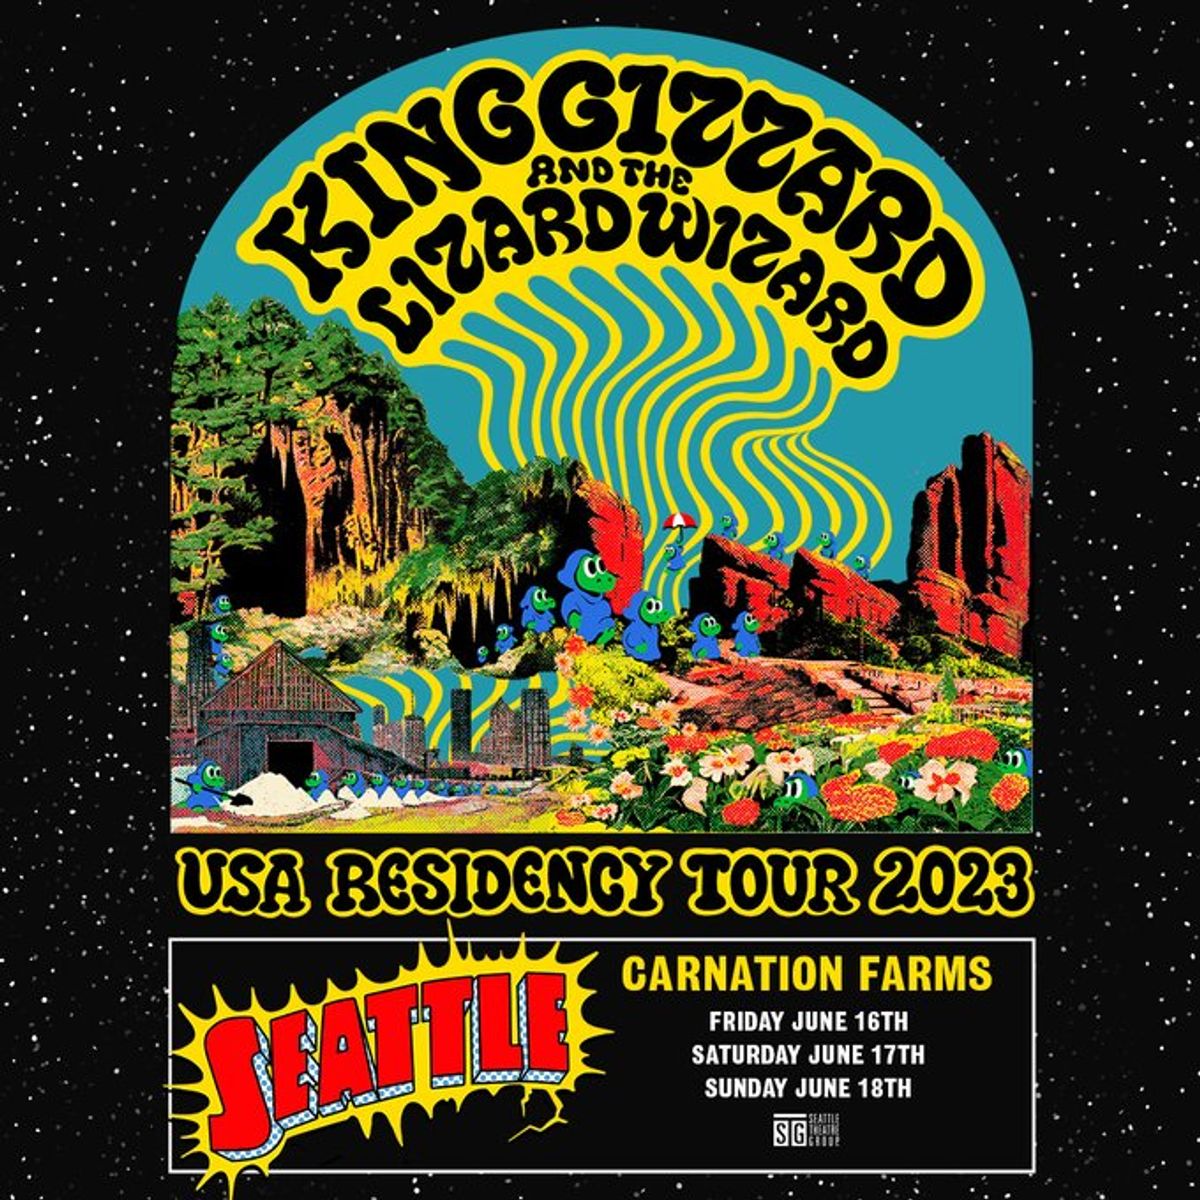 King Gizzard & The Lizard Wizard at Remlinger Farms in Carnation, WA